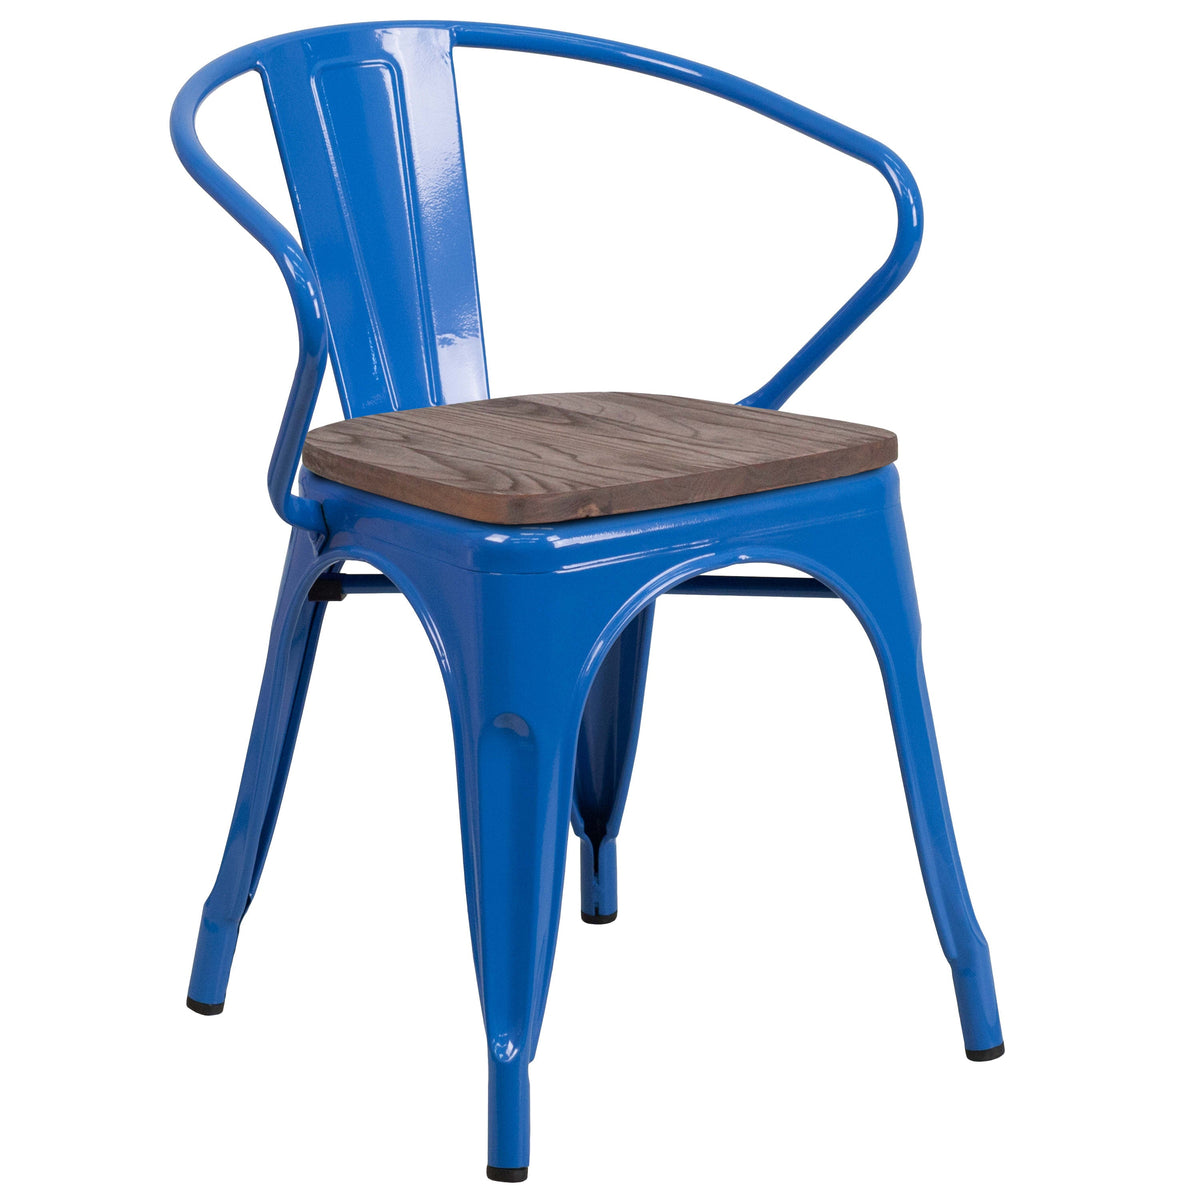 Blue |#| Blue Metal Chair with Wood Seat and Arms - Restaurant Chair - Bistro Chair